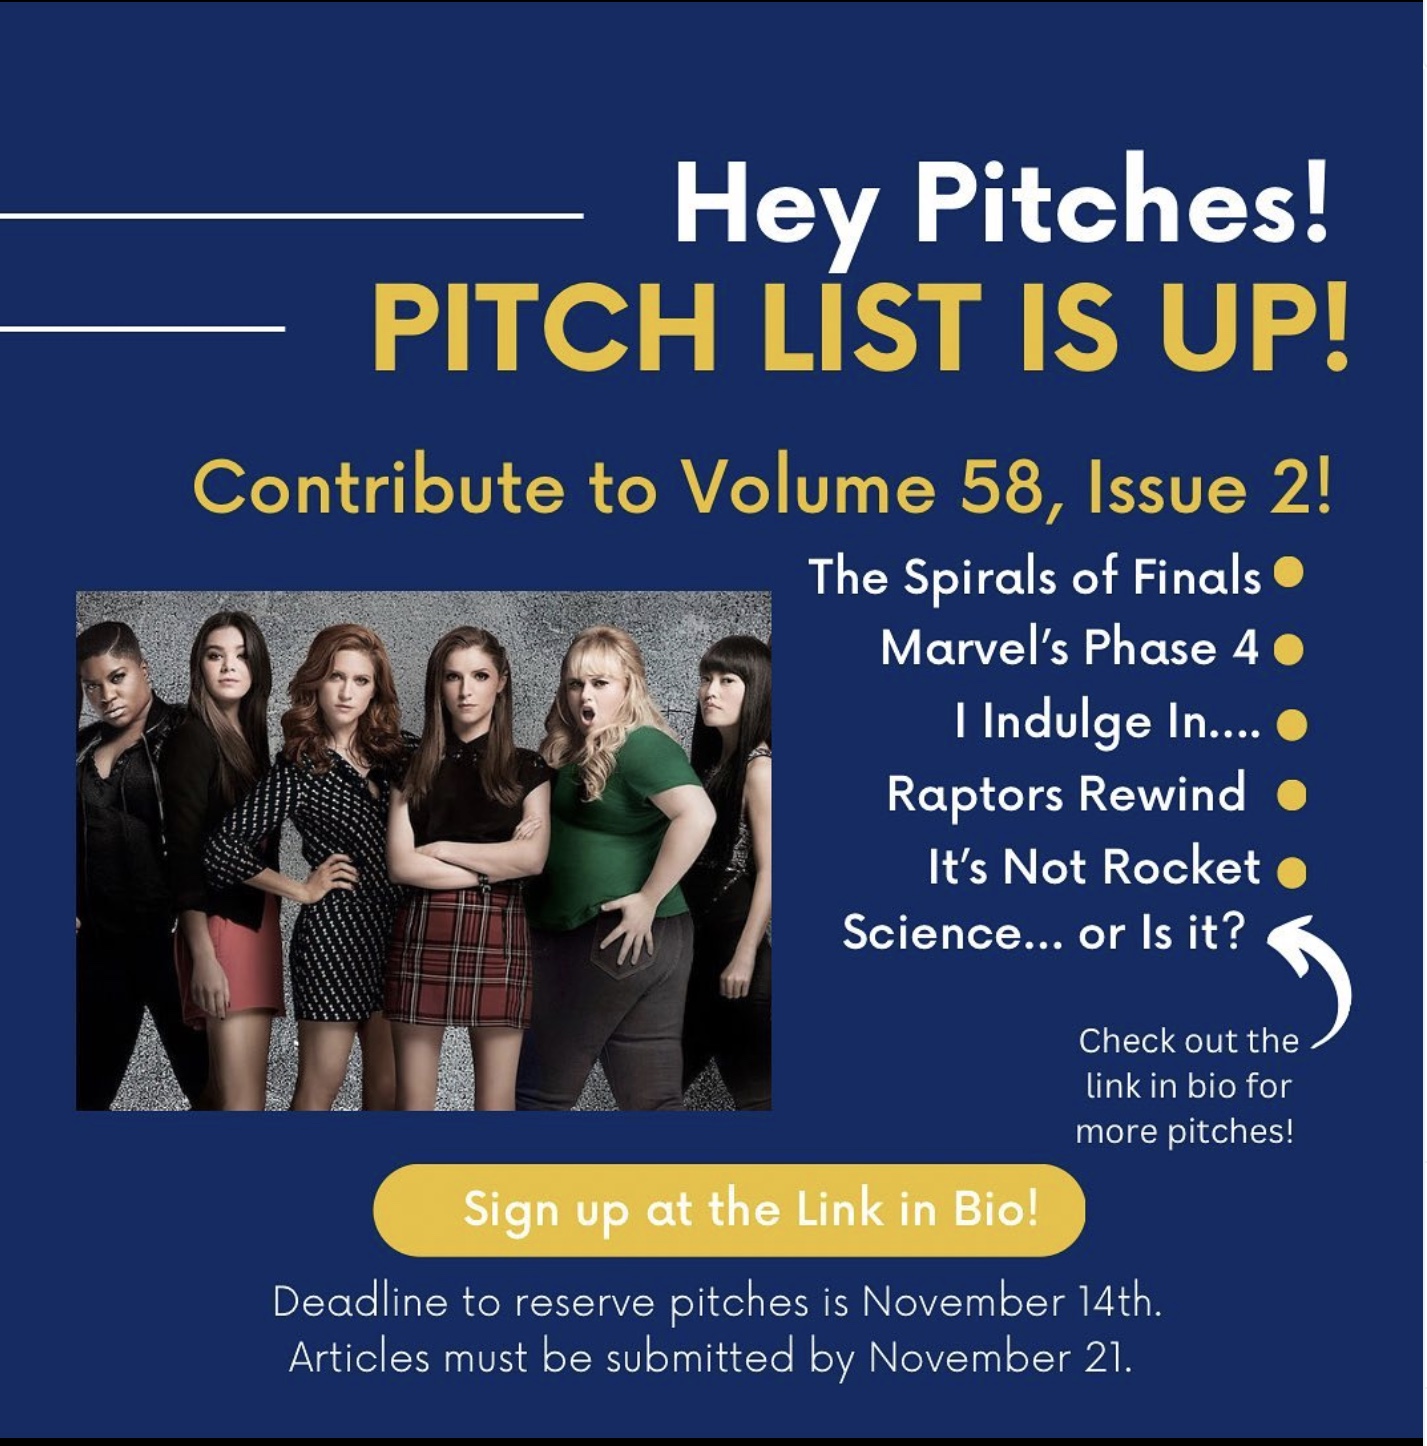 Hey Pitches!  Pitch List is Up!